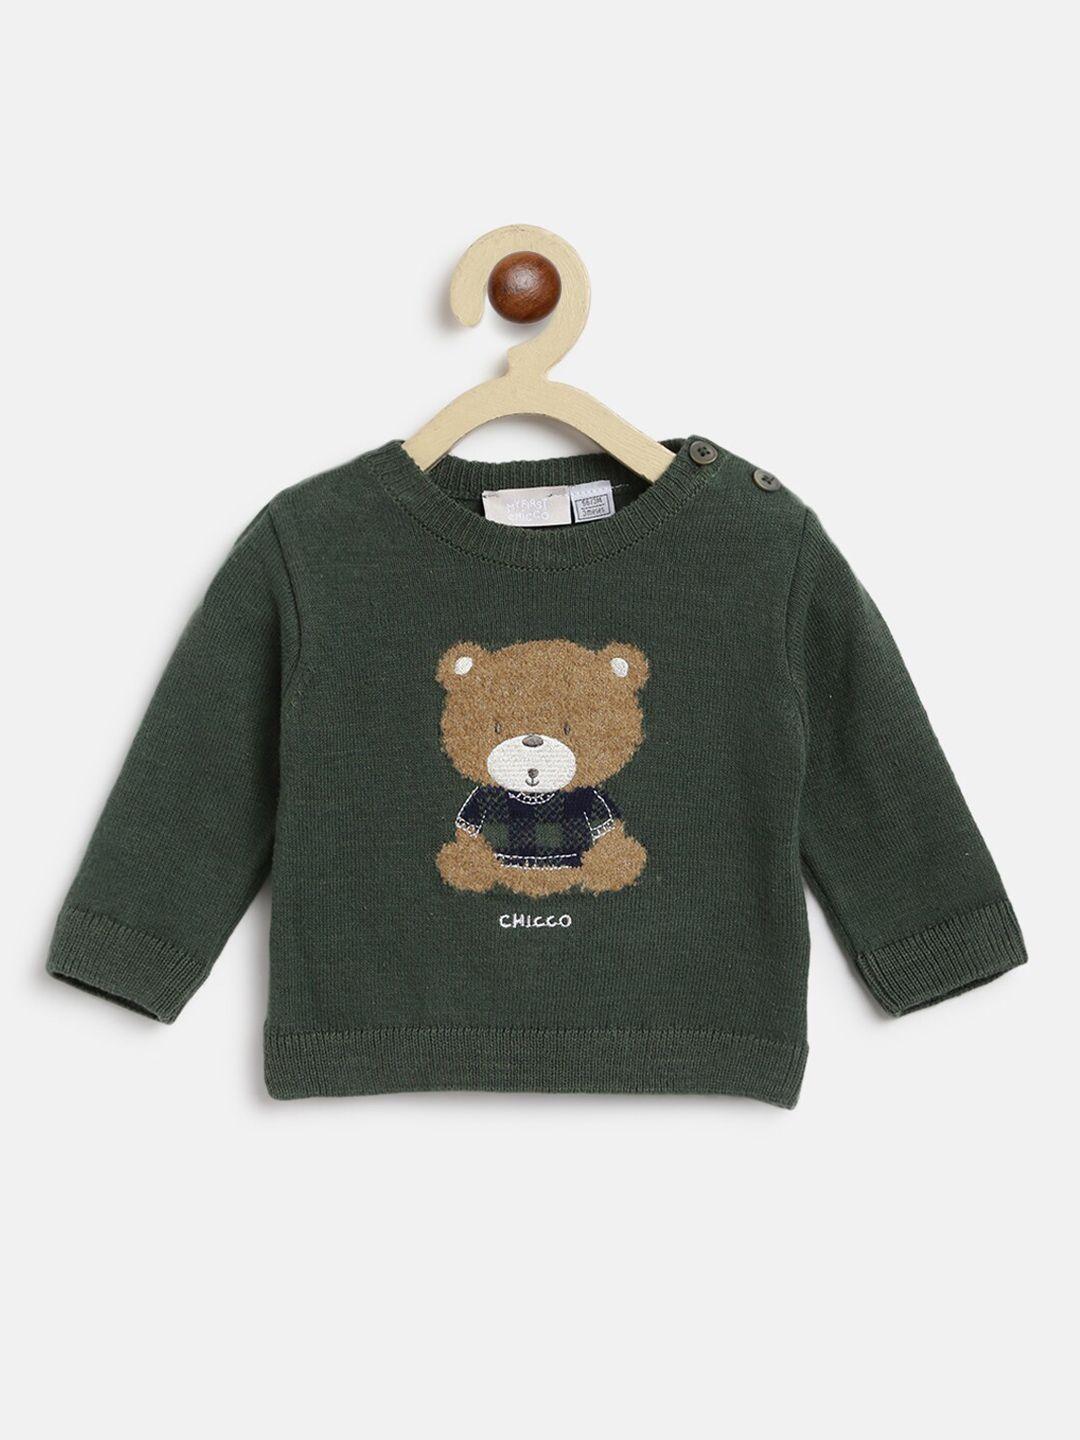 chicco boys olive green & brown pullover with embroidered detail